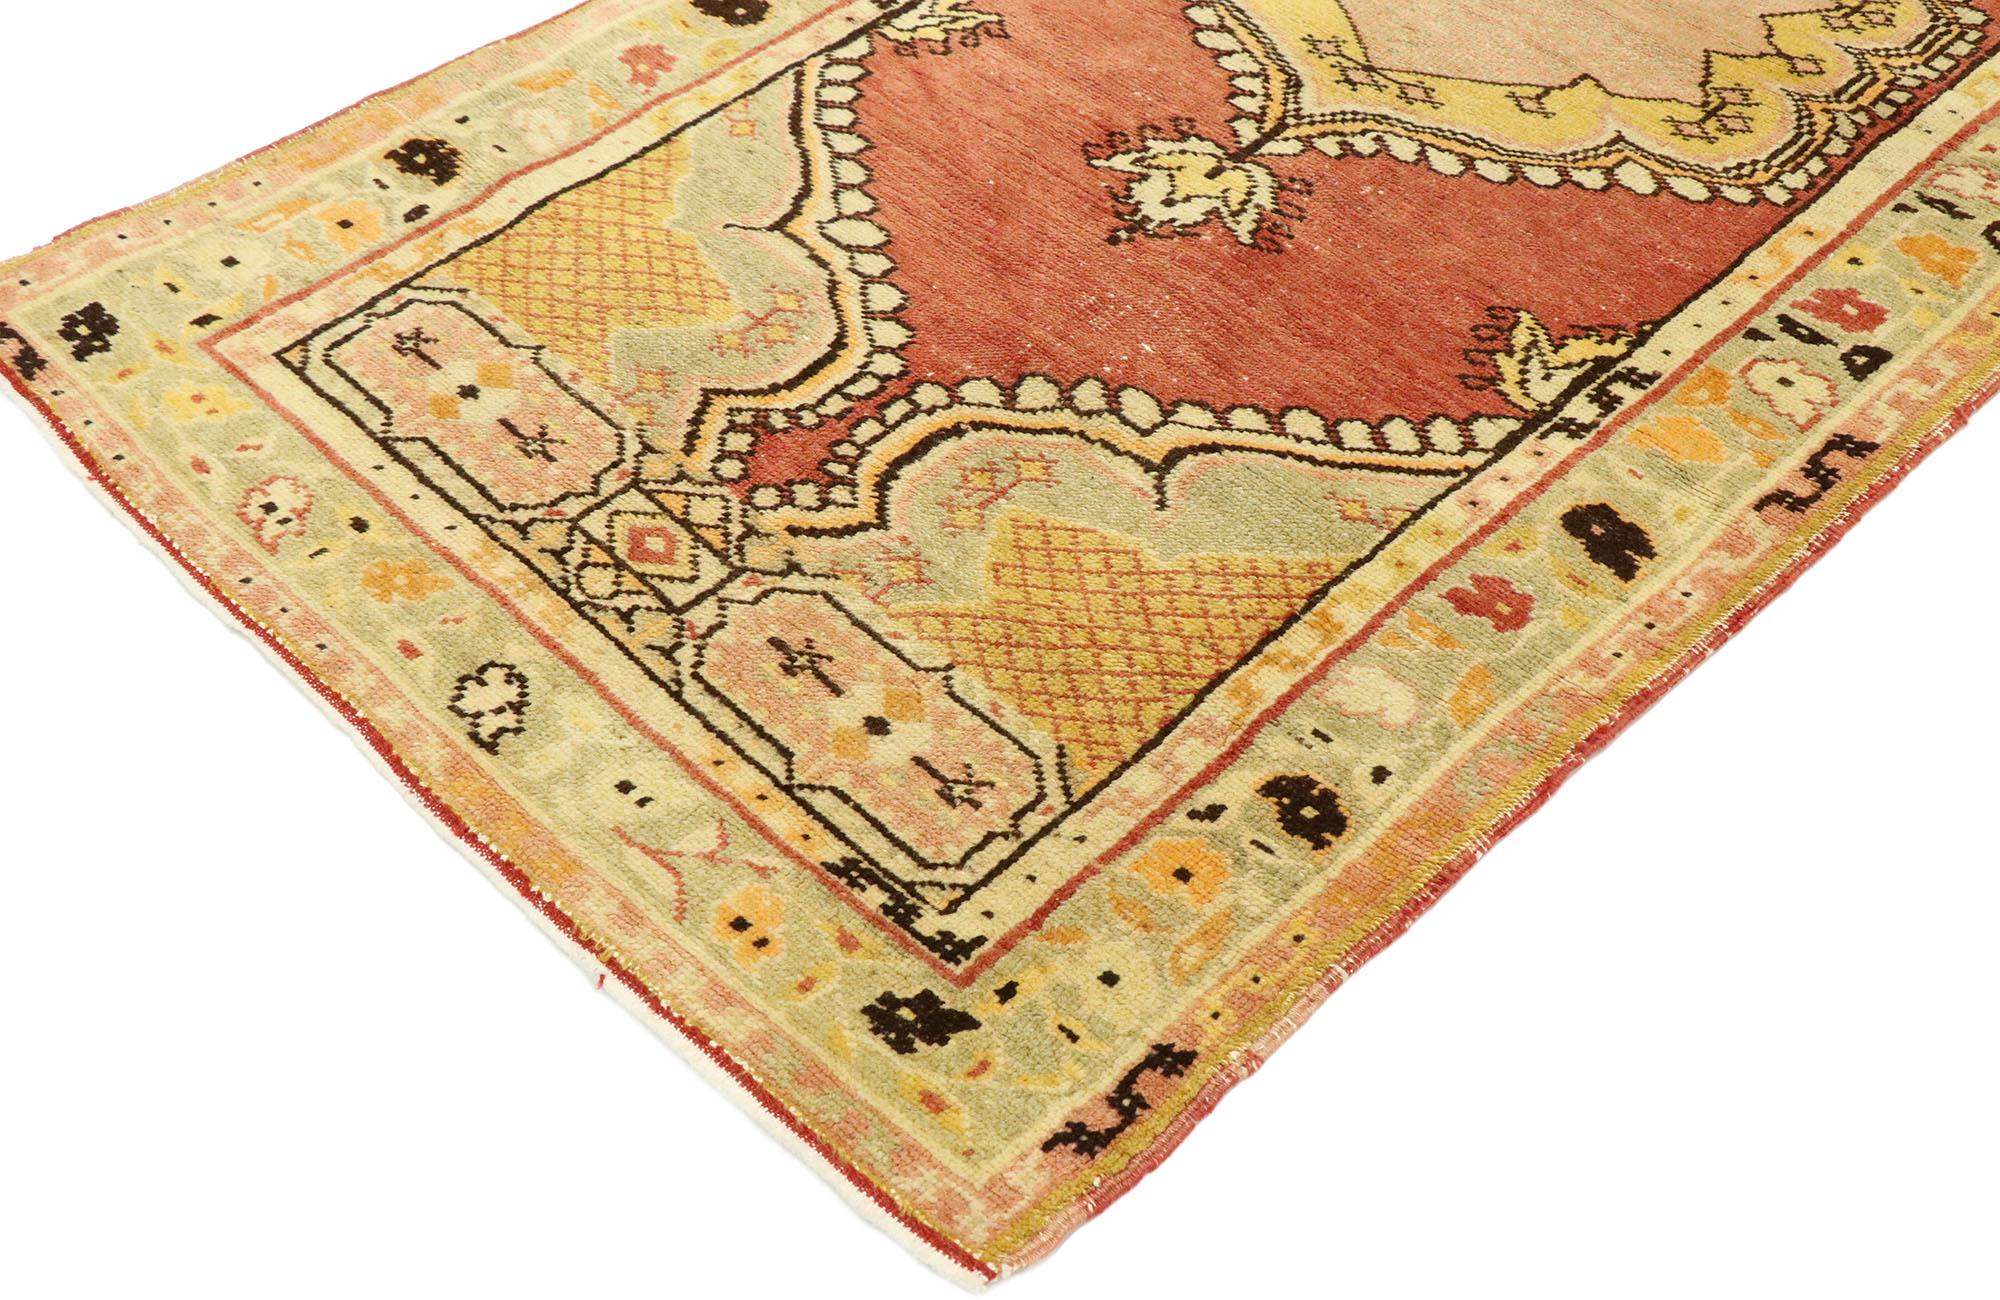 53057, vintage Turkish Oushak rug with Warm Spanish style. Effortless beauty and soft, bespoke vibes meet warm Spanish style in this hand knotted wool vintage Turkish Oushak rug. The open abrashed rust colored field features a cusped central